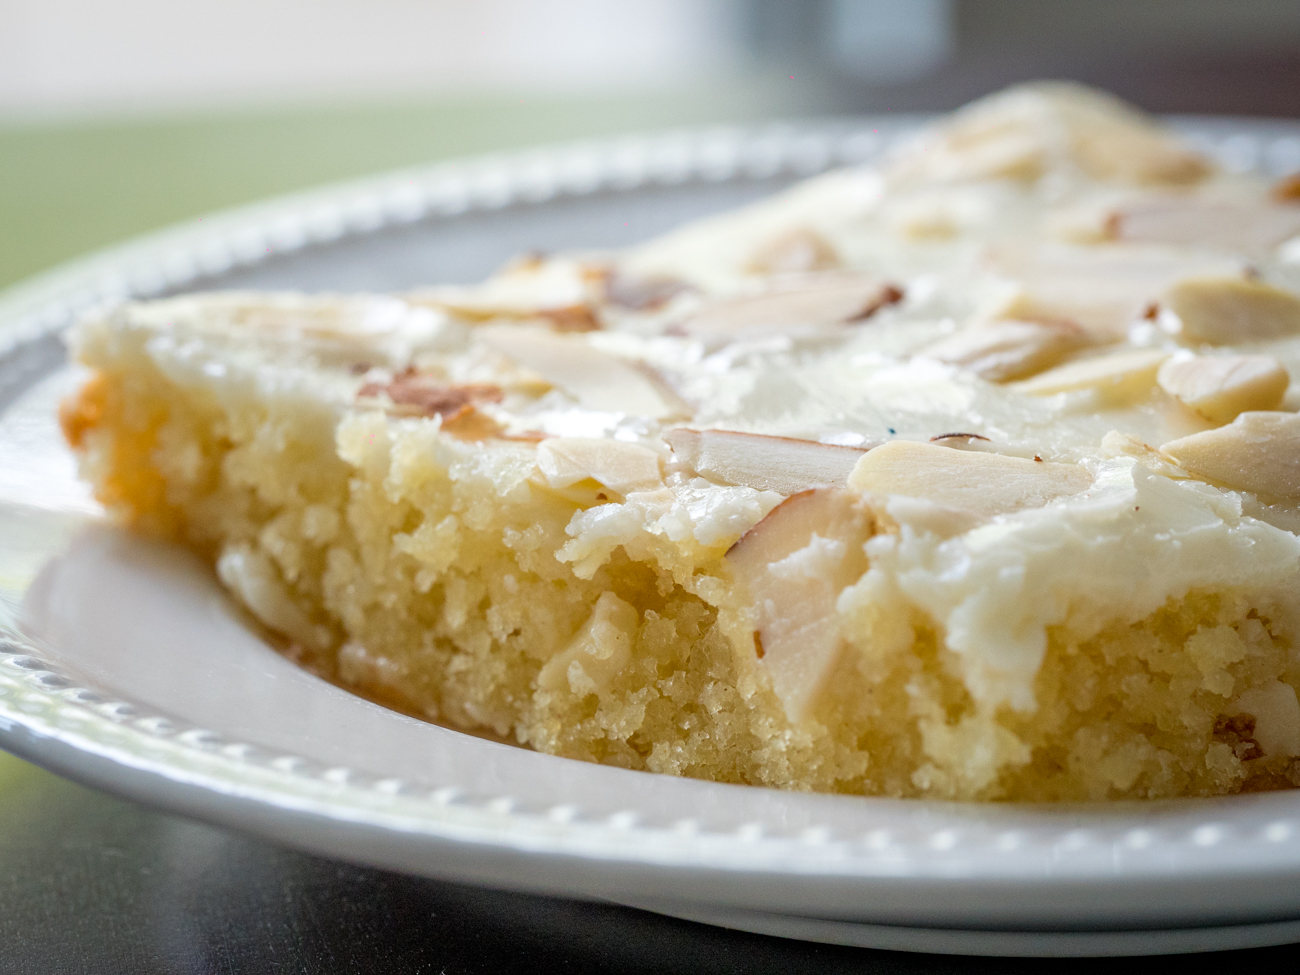 Almond Texas Sheet Cake for Two